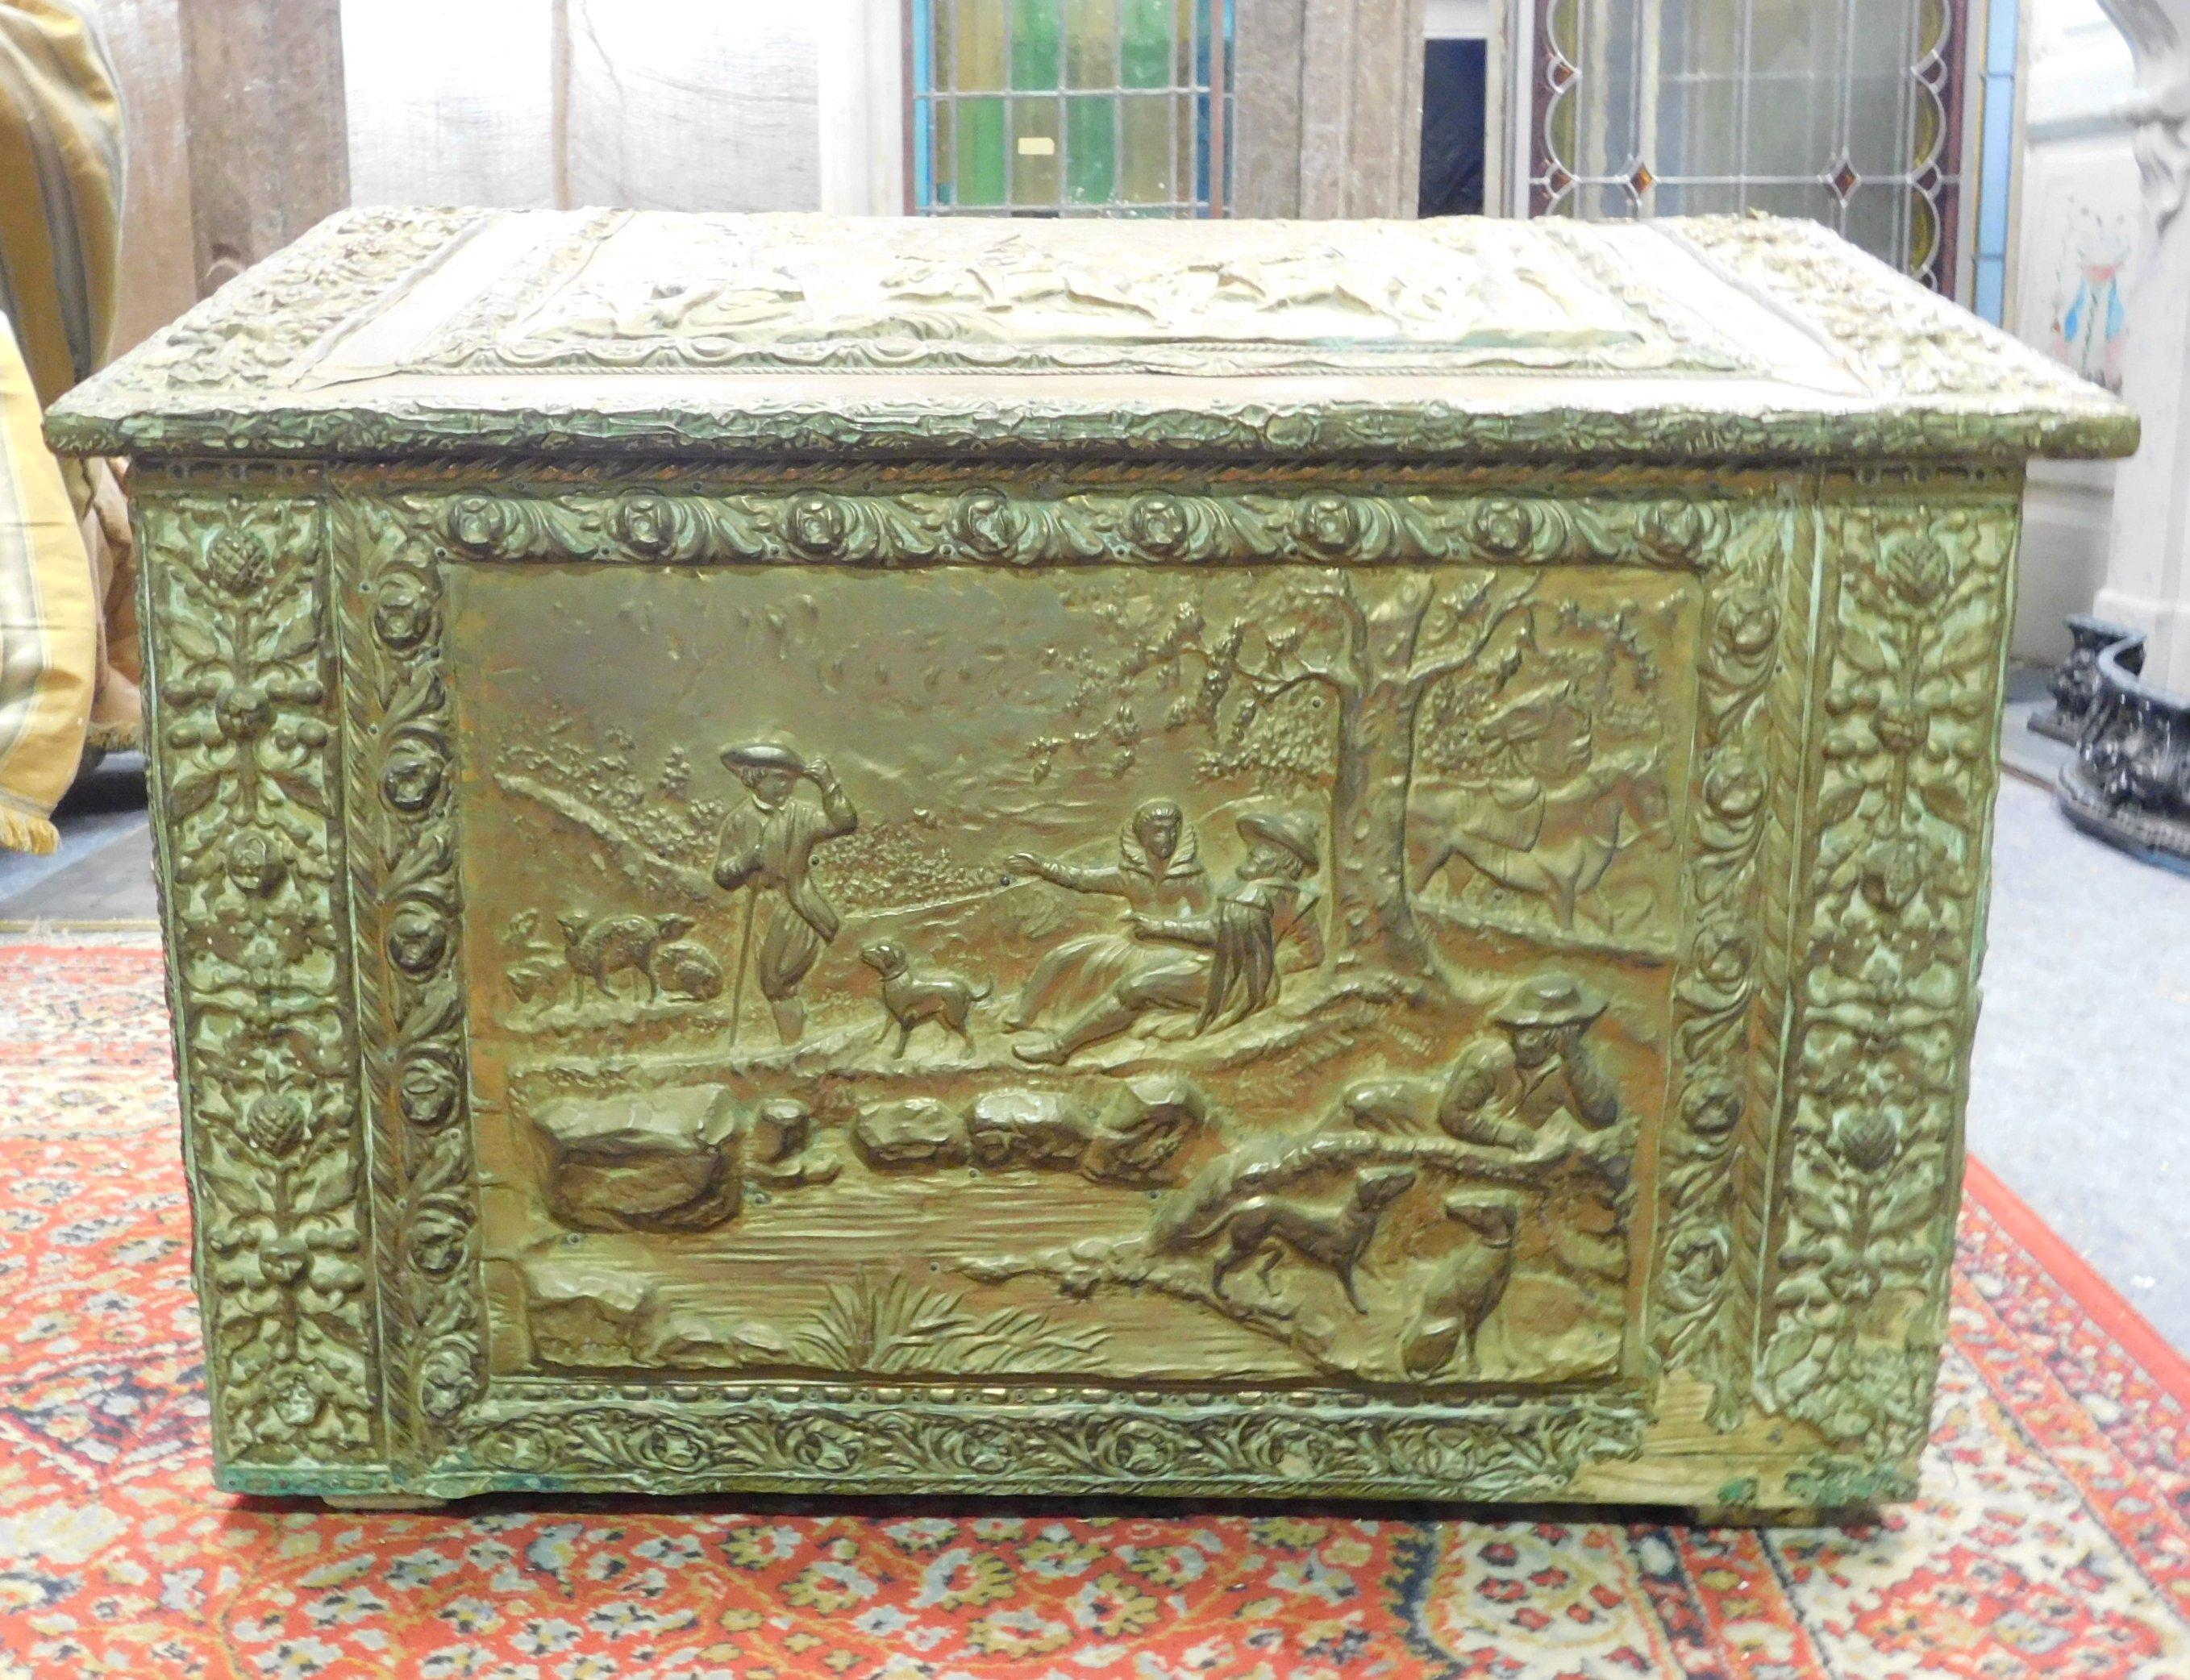 Antique wood-holder covered in embossed brass, wood covered with embossed and sculpted sheet metal, then gilded, with scenes of everyday life of the time. Built by hand in the late 19th century, it can be used as a storage box, log holder, chest,